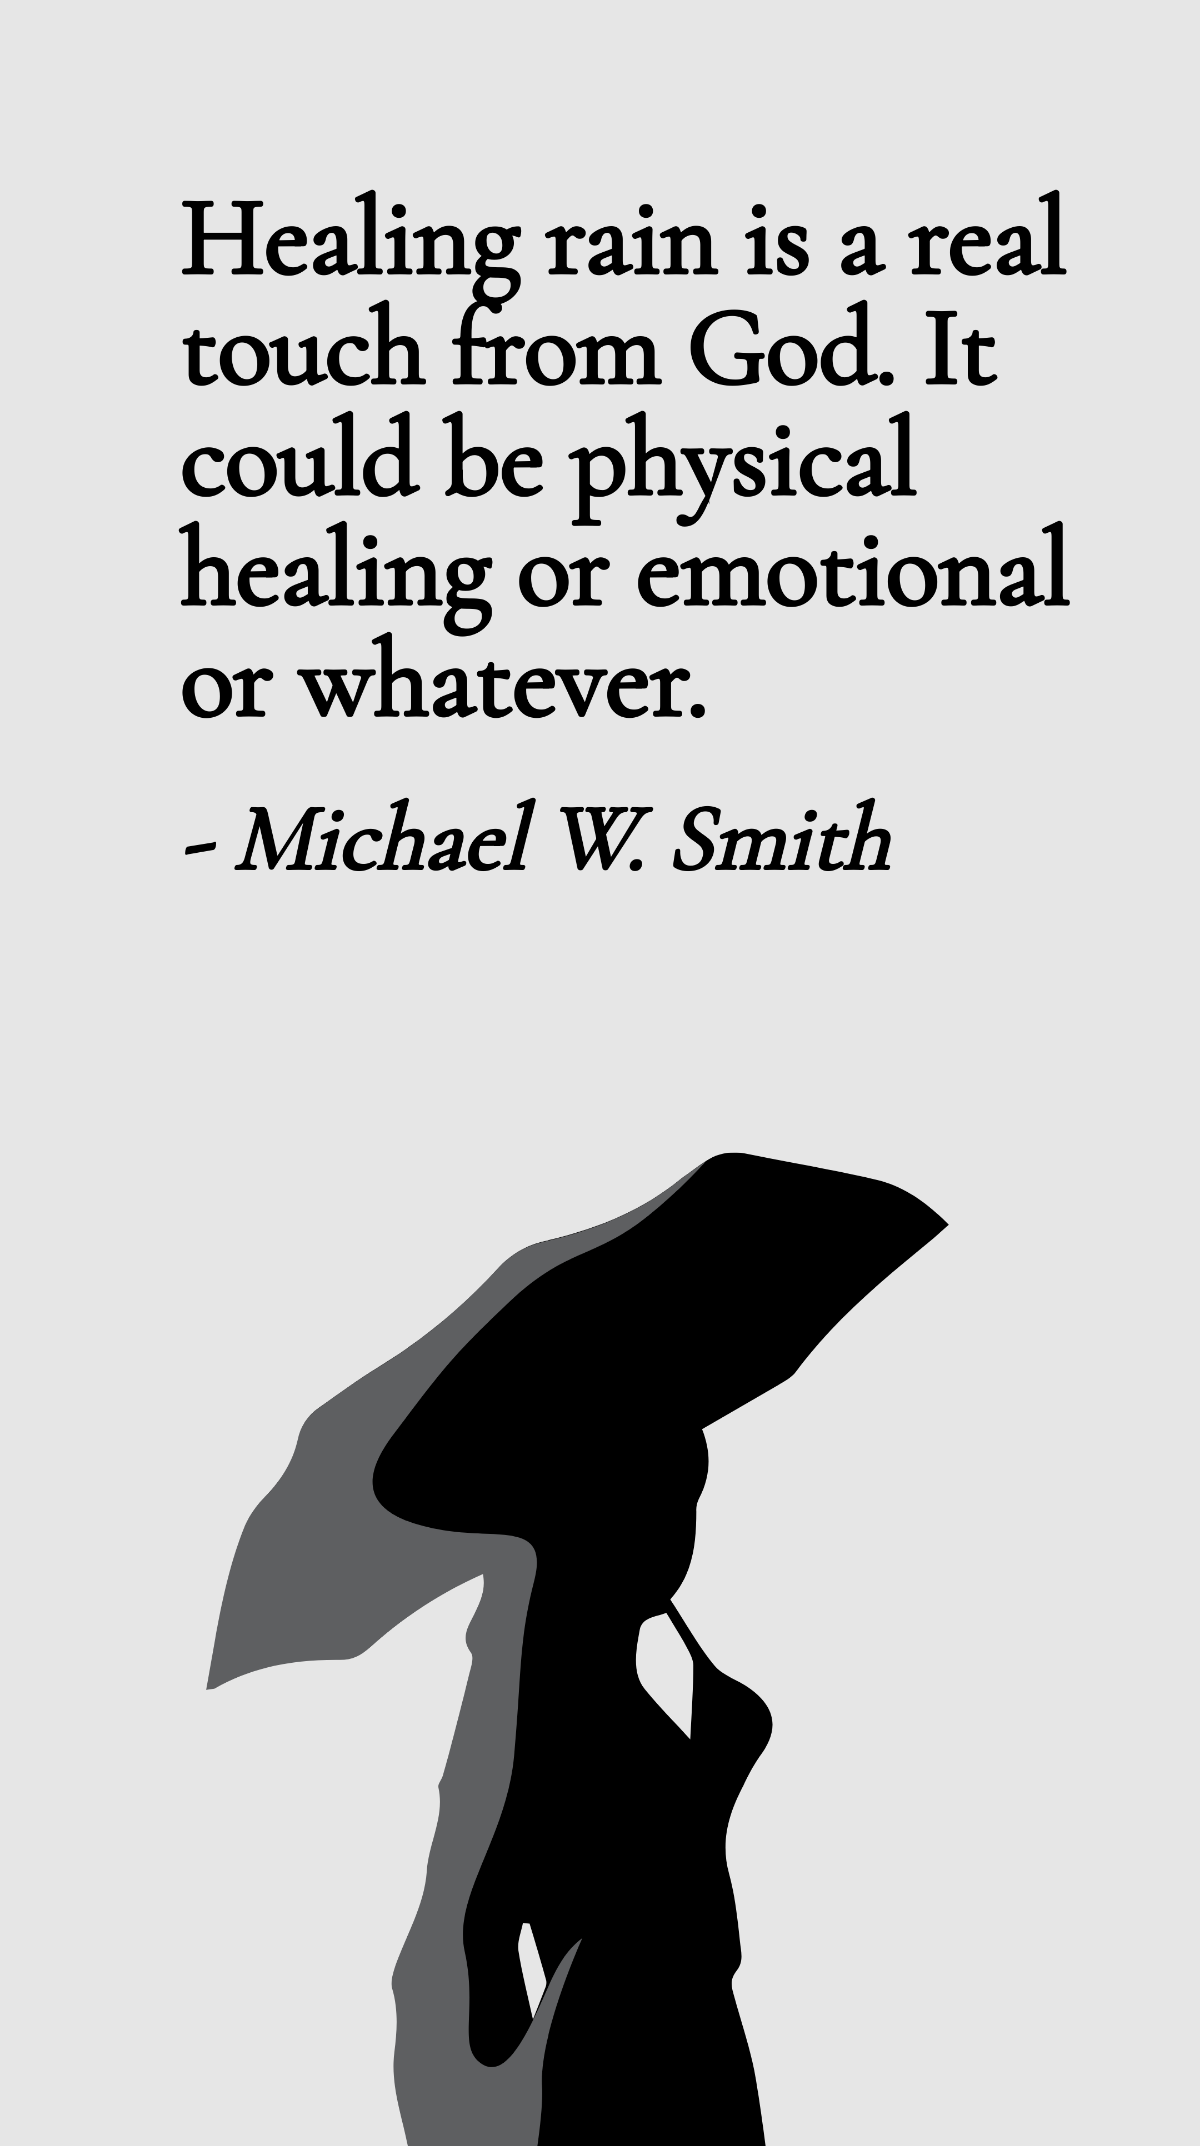 Free Michael W. Smith - Healing rain is a real touch from God. It could be physical healing or emotional or whatever. Template